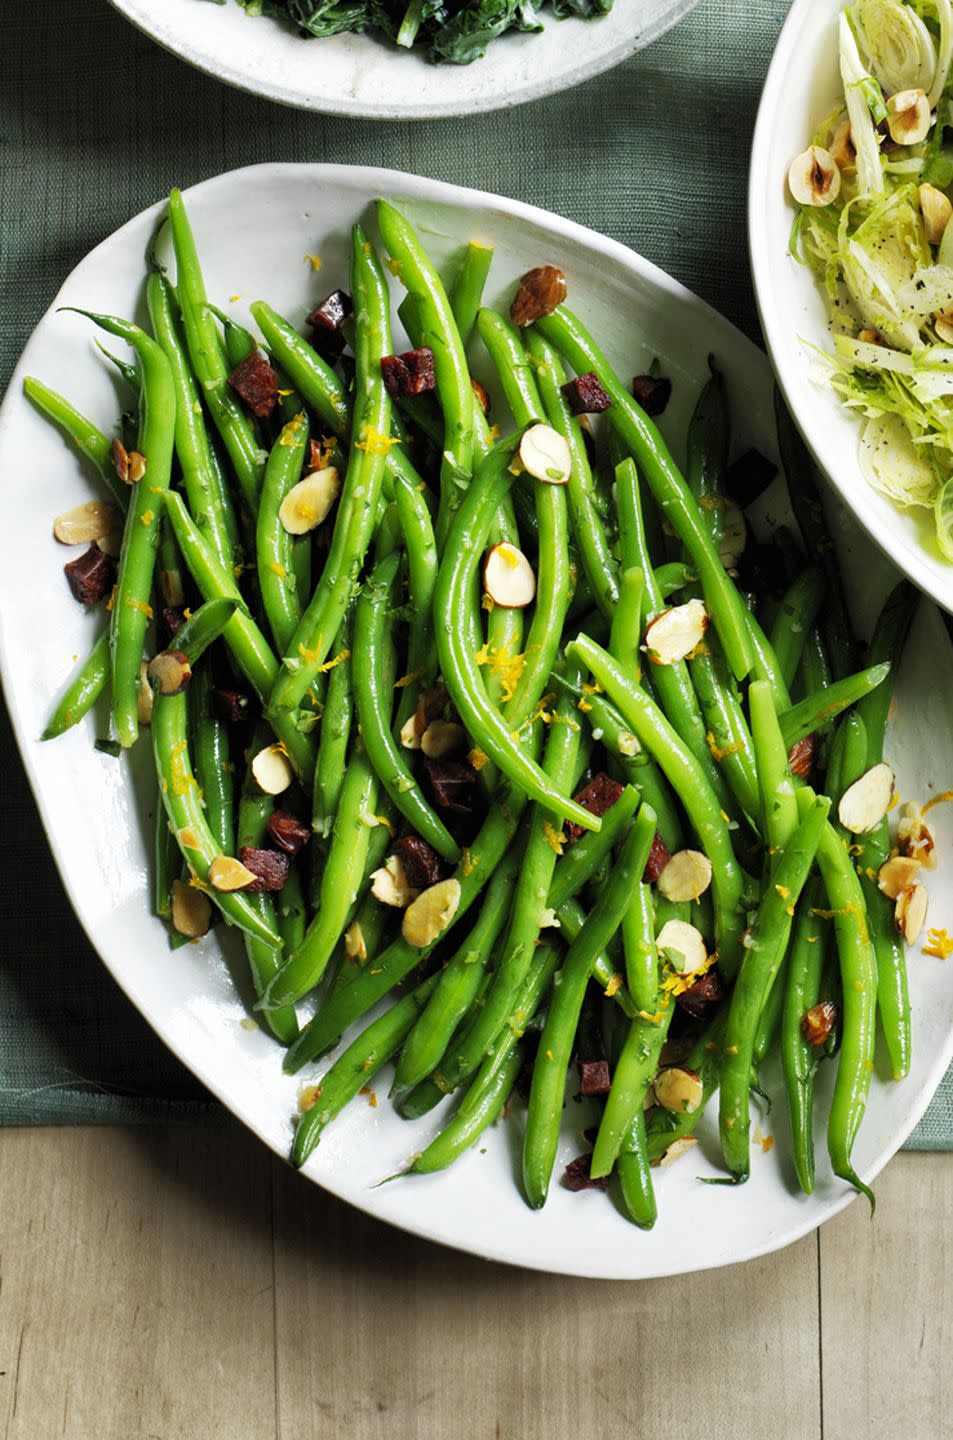 Green Beans with Chorizo and Almond Crumbs